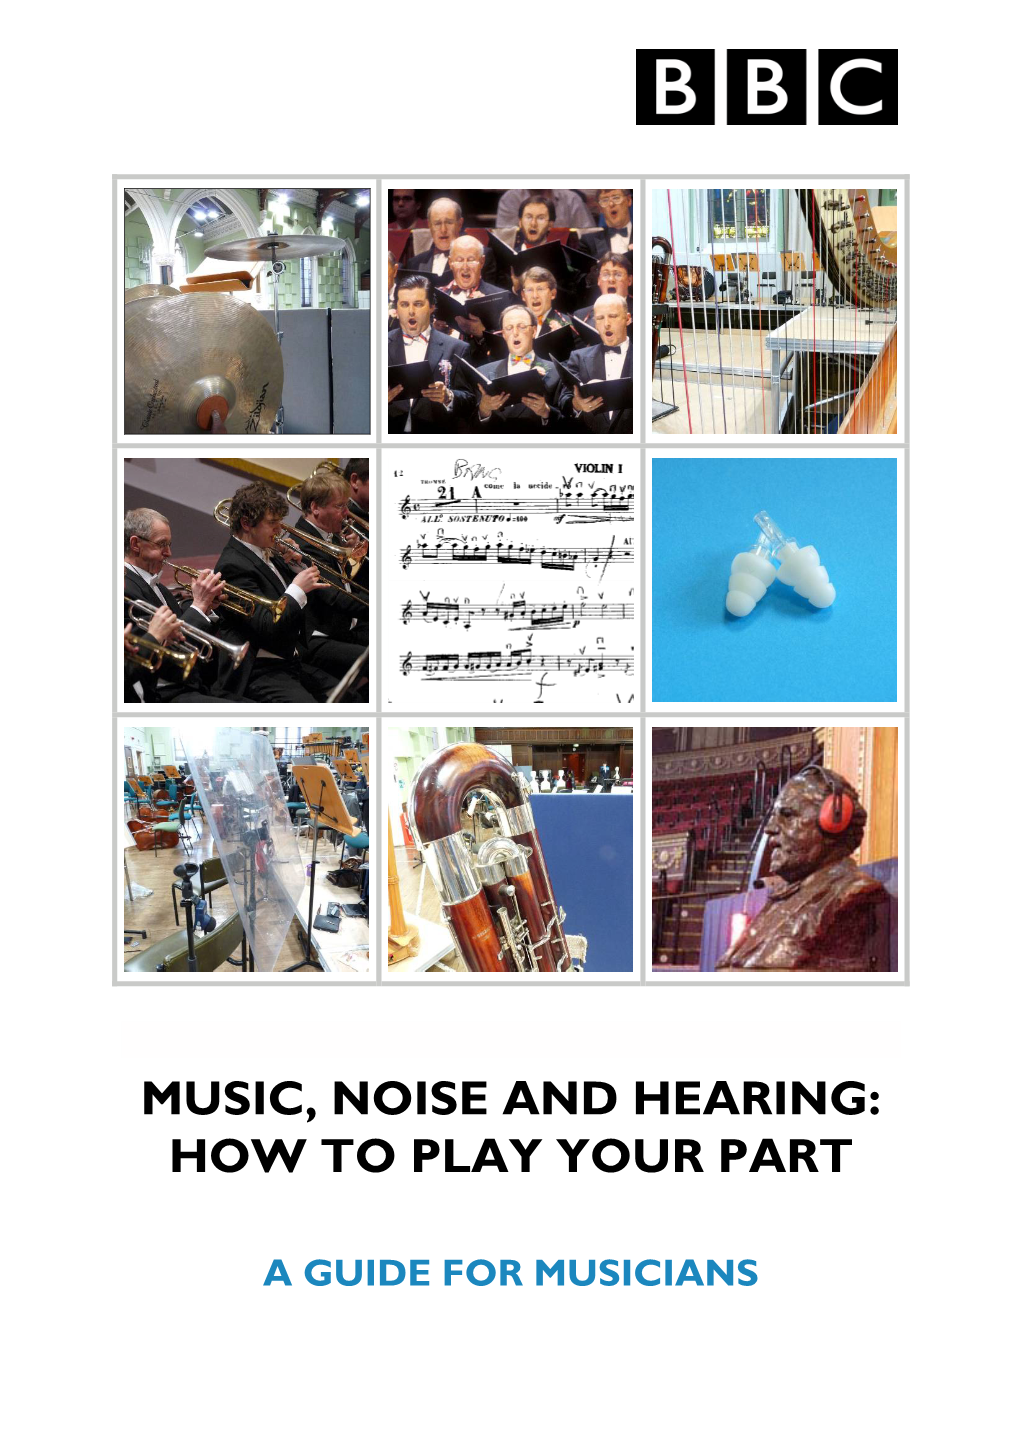 Musicians' Guide to Noise and Hearing